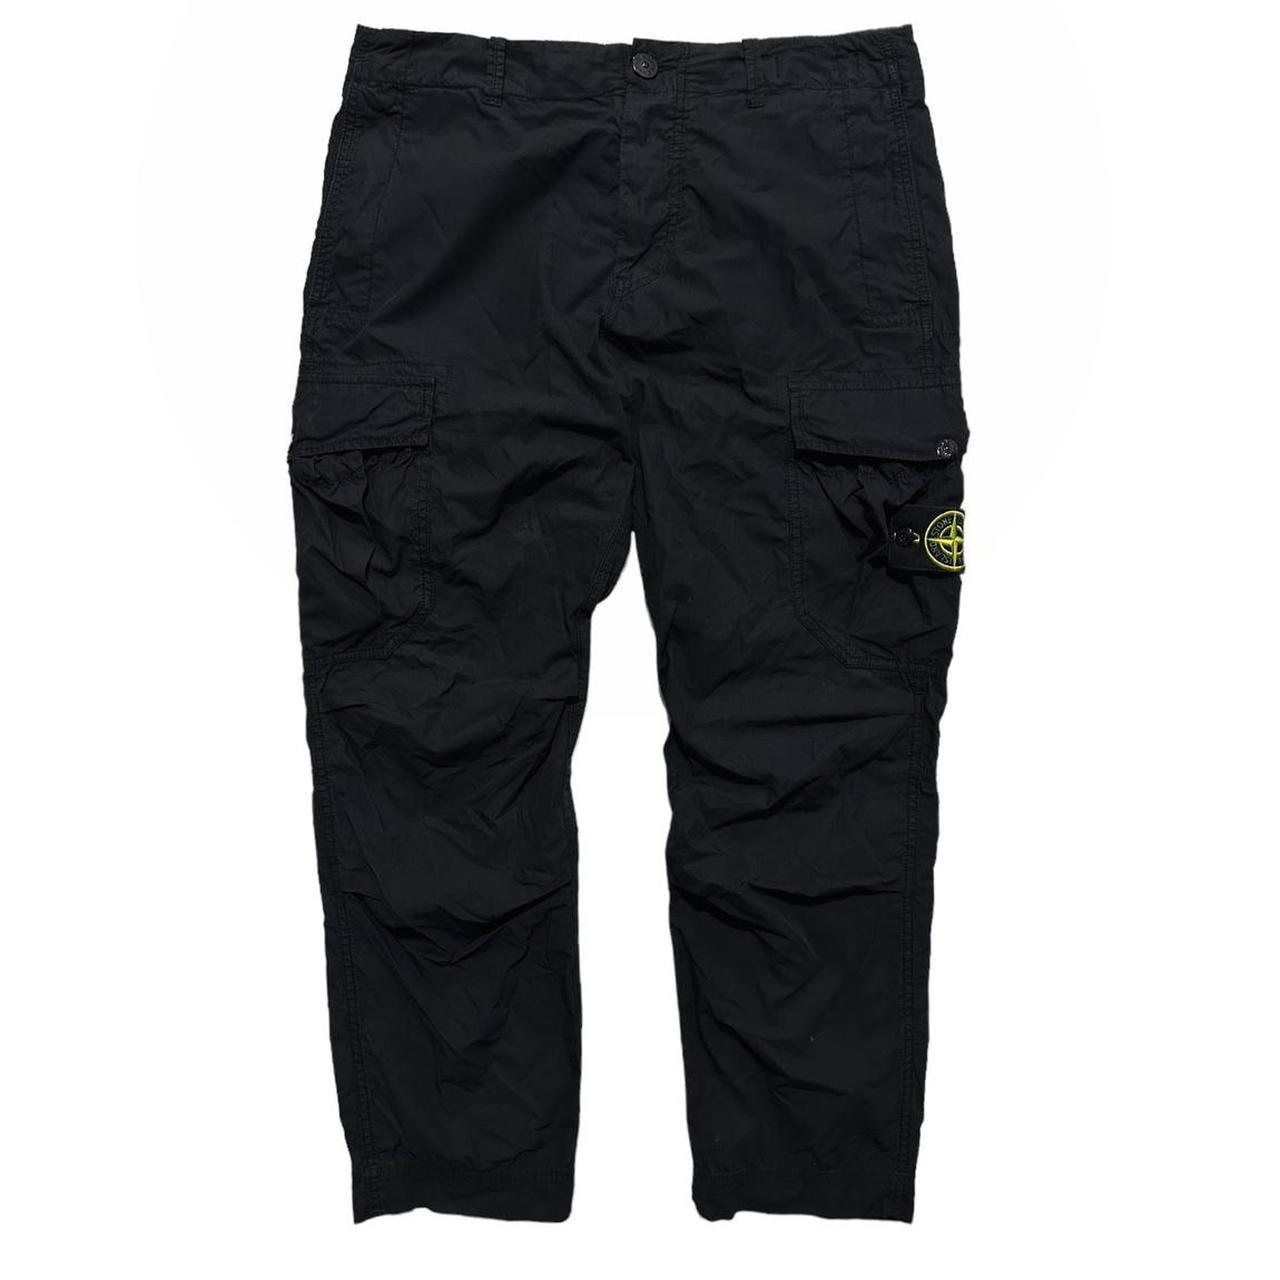 Stone Island Black Cropped Combat Cargos - Known Source